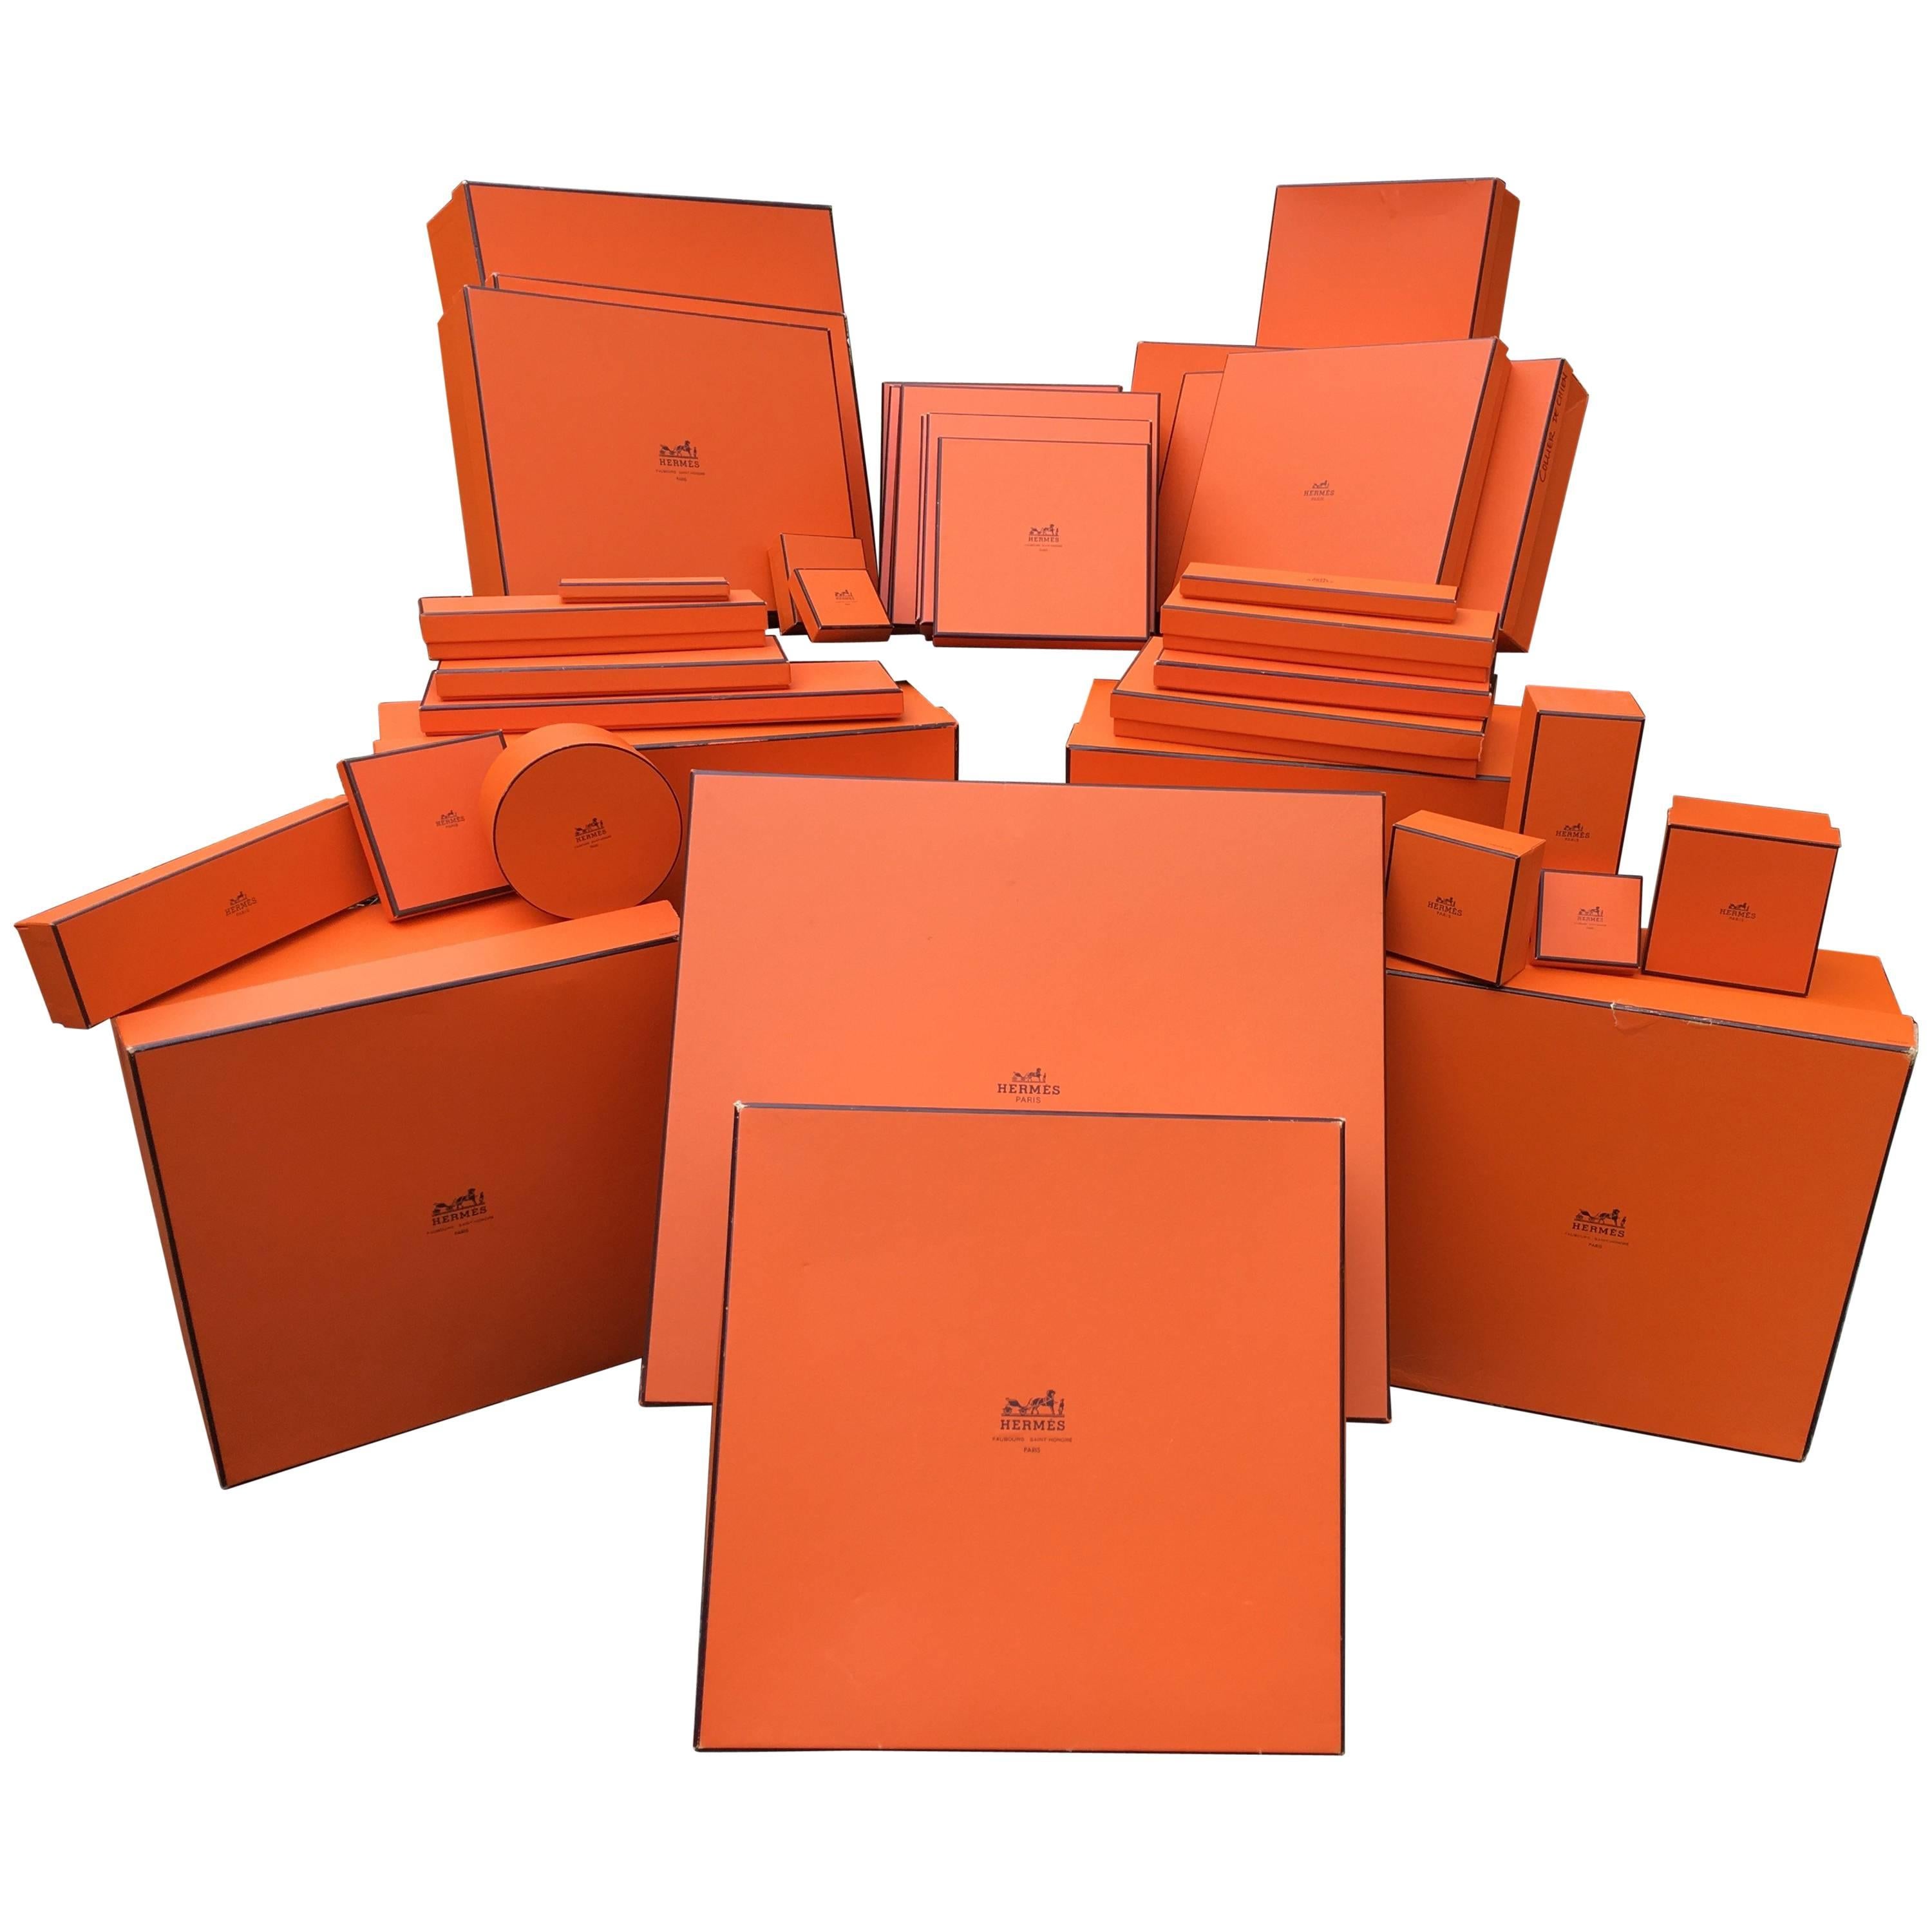 Hermes Box Collection